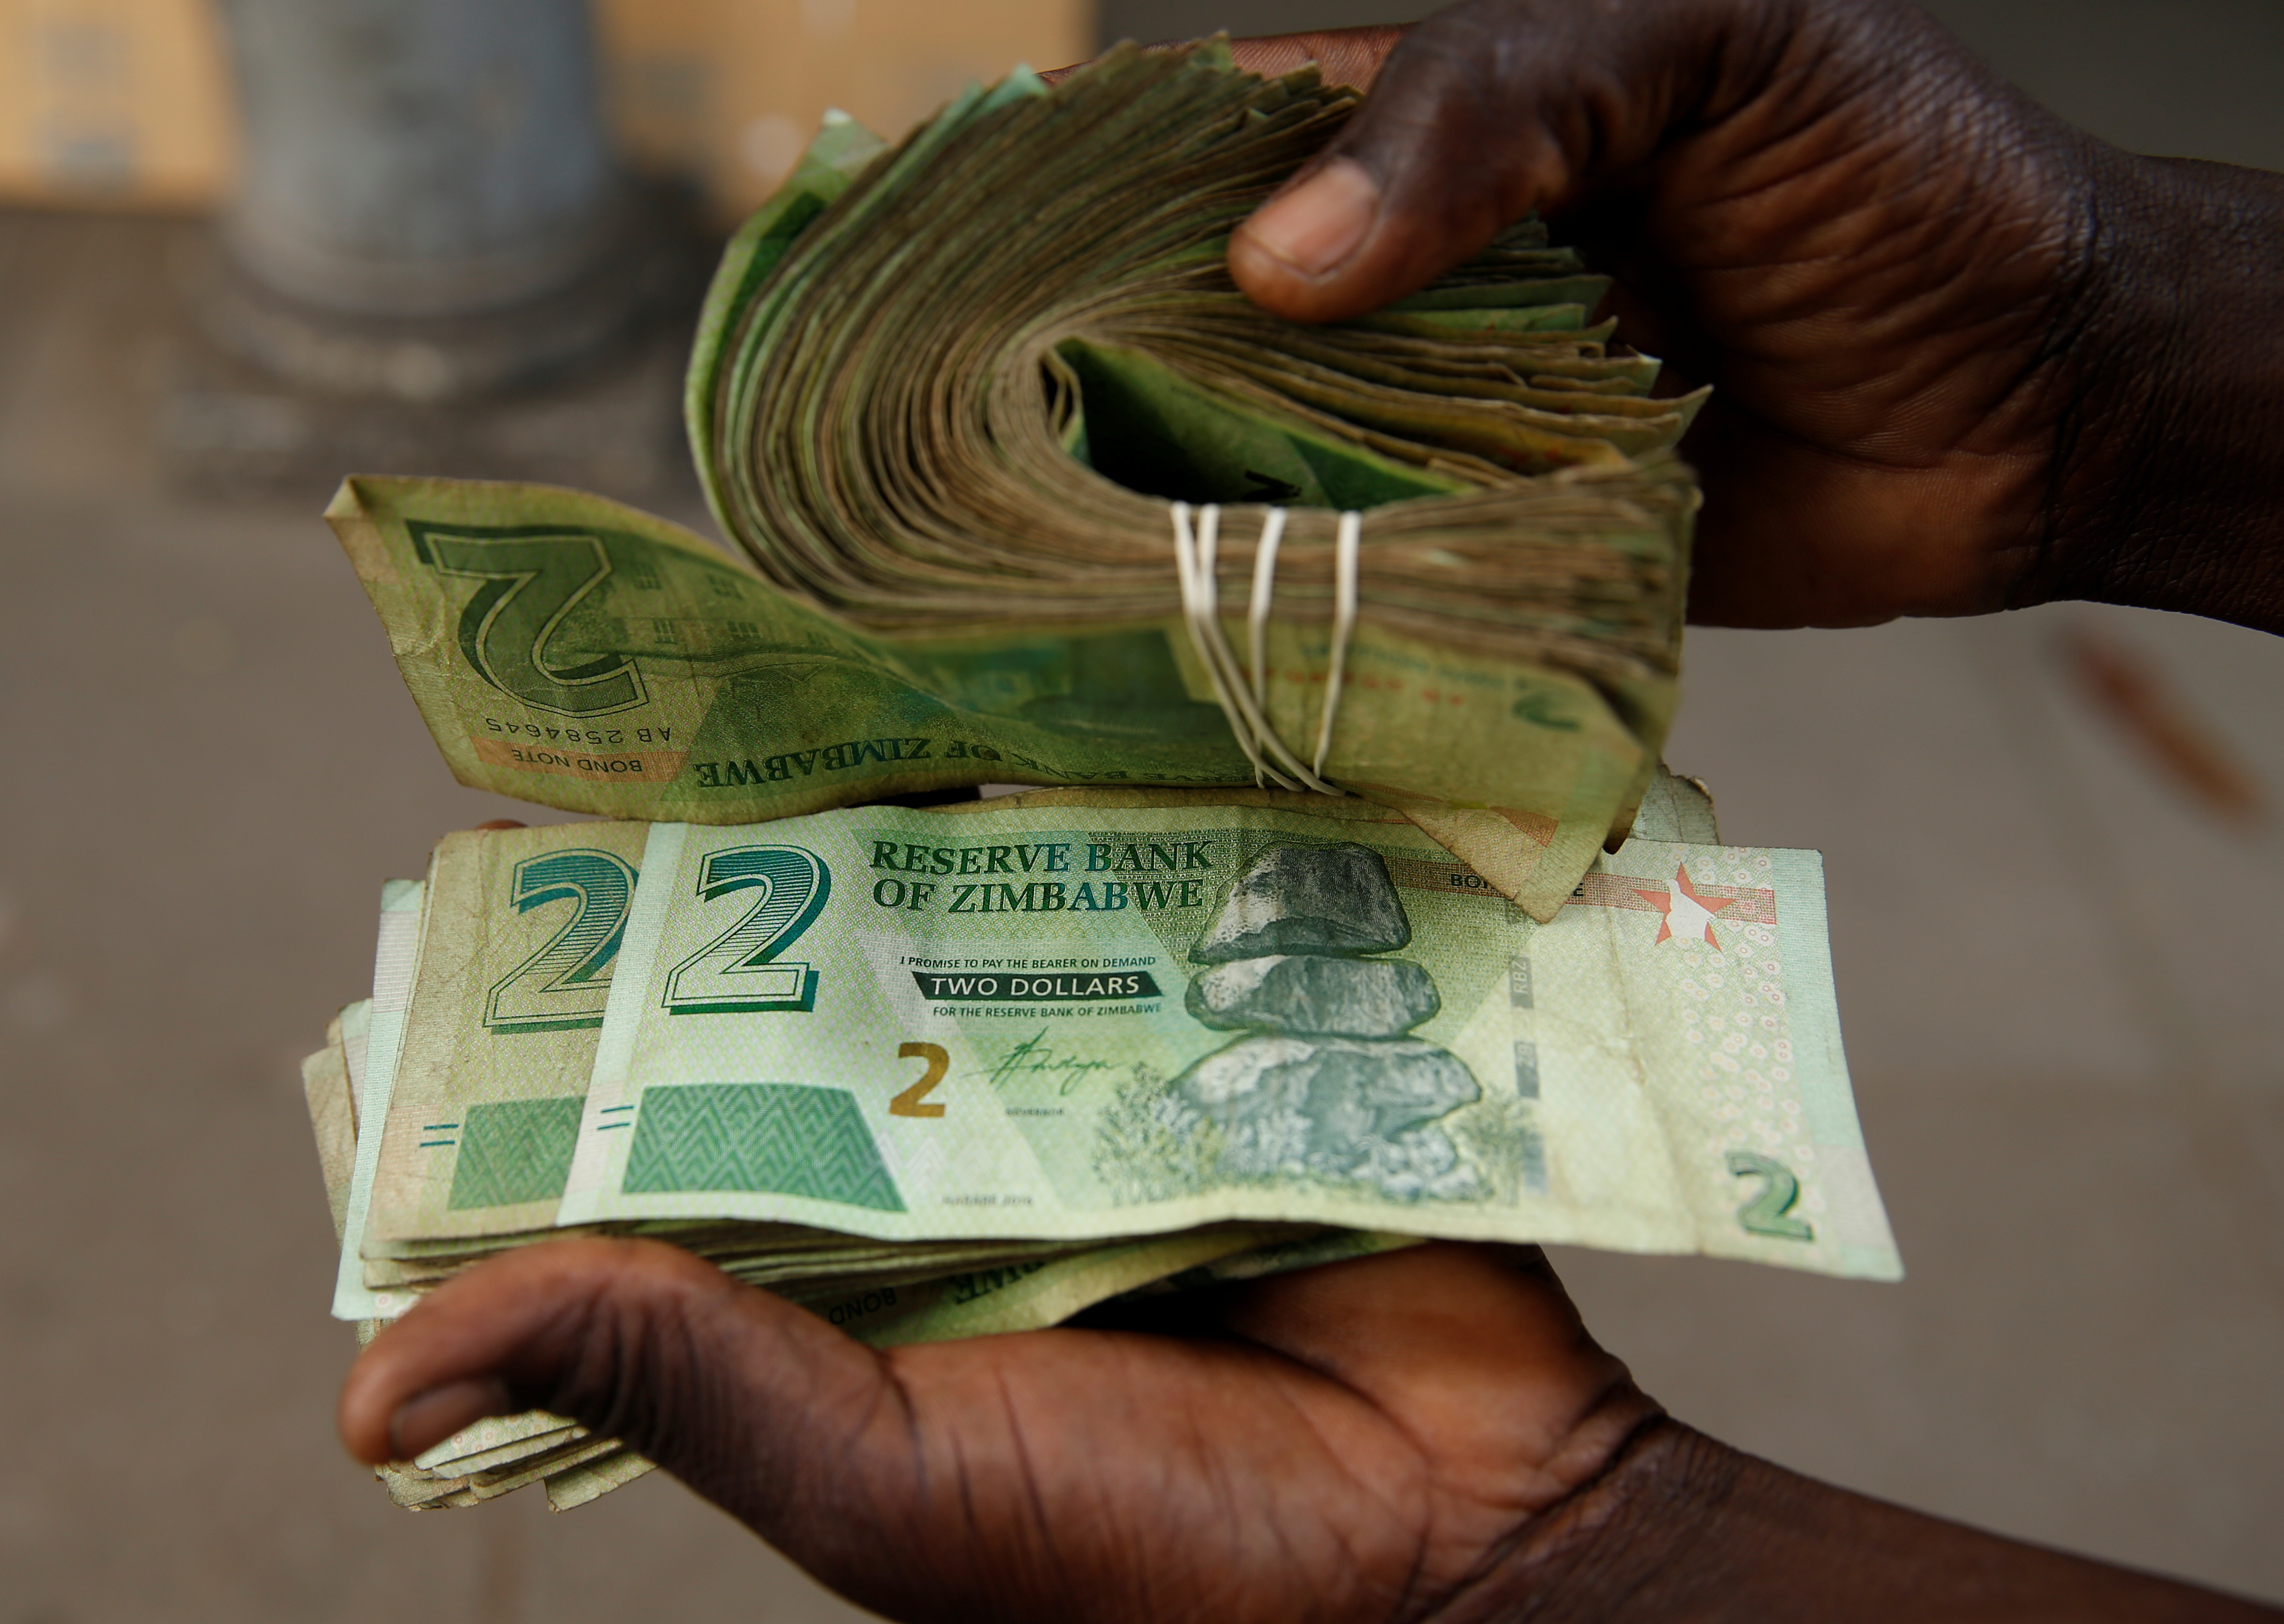 A street vendor poses as he displays bond notes, before the introduction of new currency in Harare